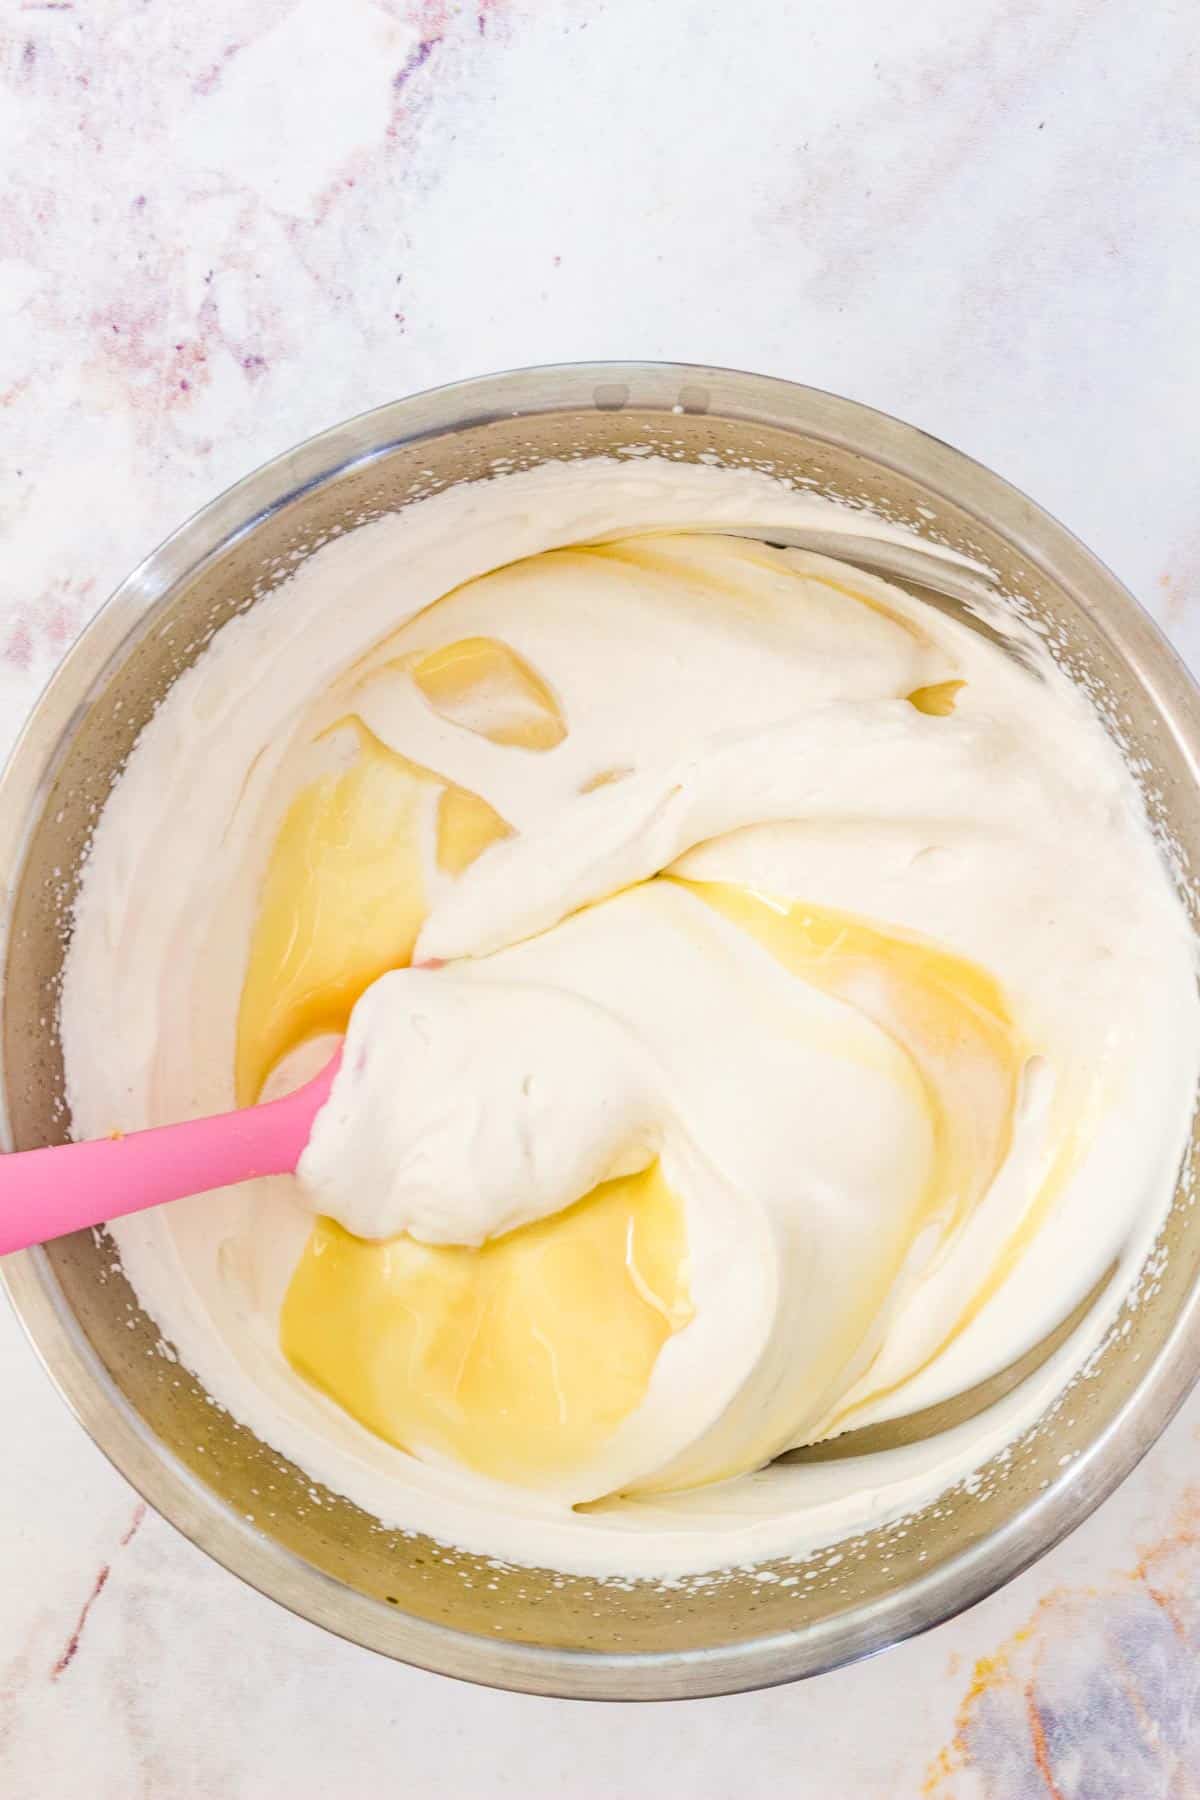 Sweetened condensed milk is folded into whipped cream with a pink stirring spoon.